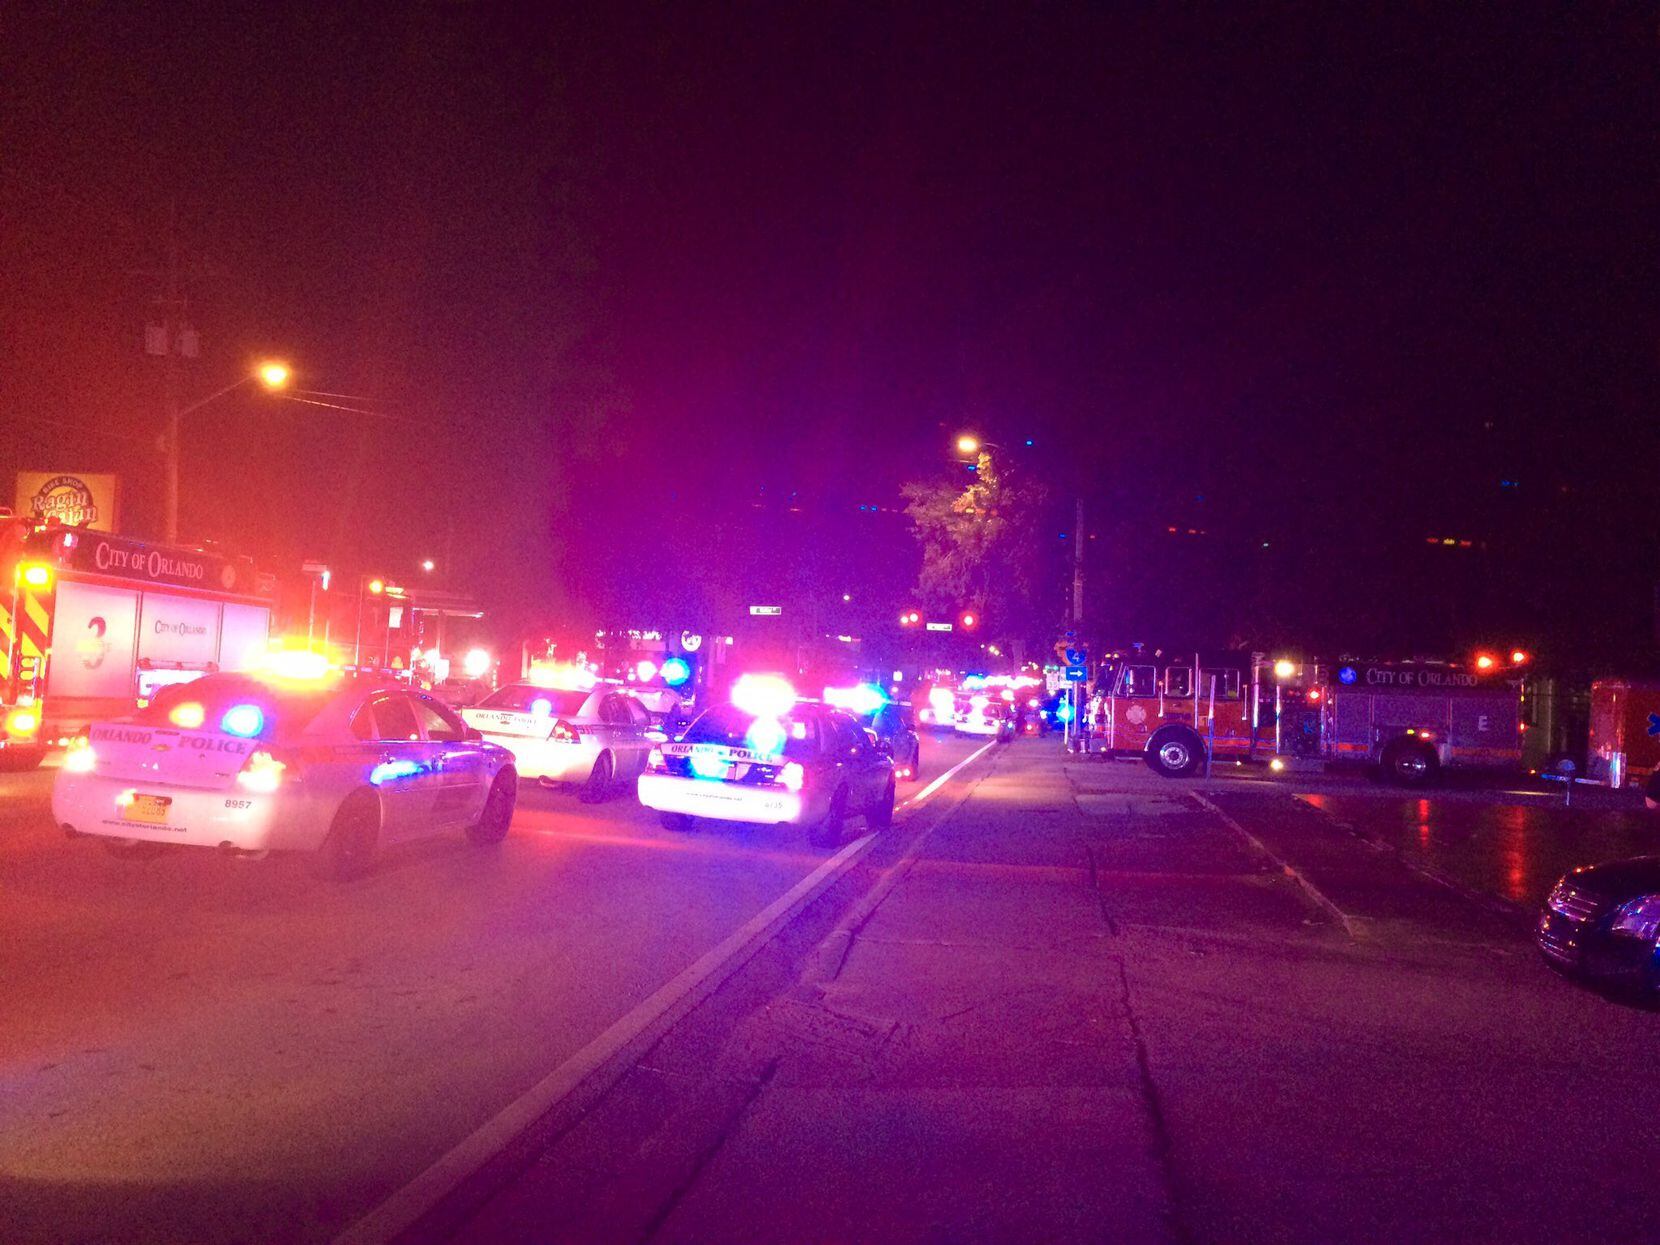  Orlando police swarmed to a gay nightclub after a mass shooting was reported there early...